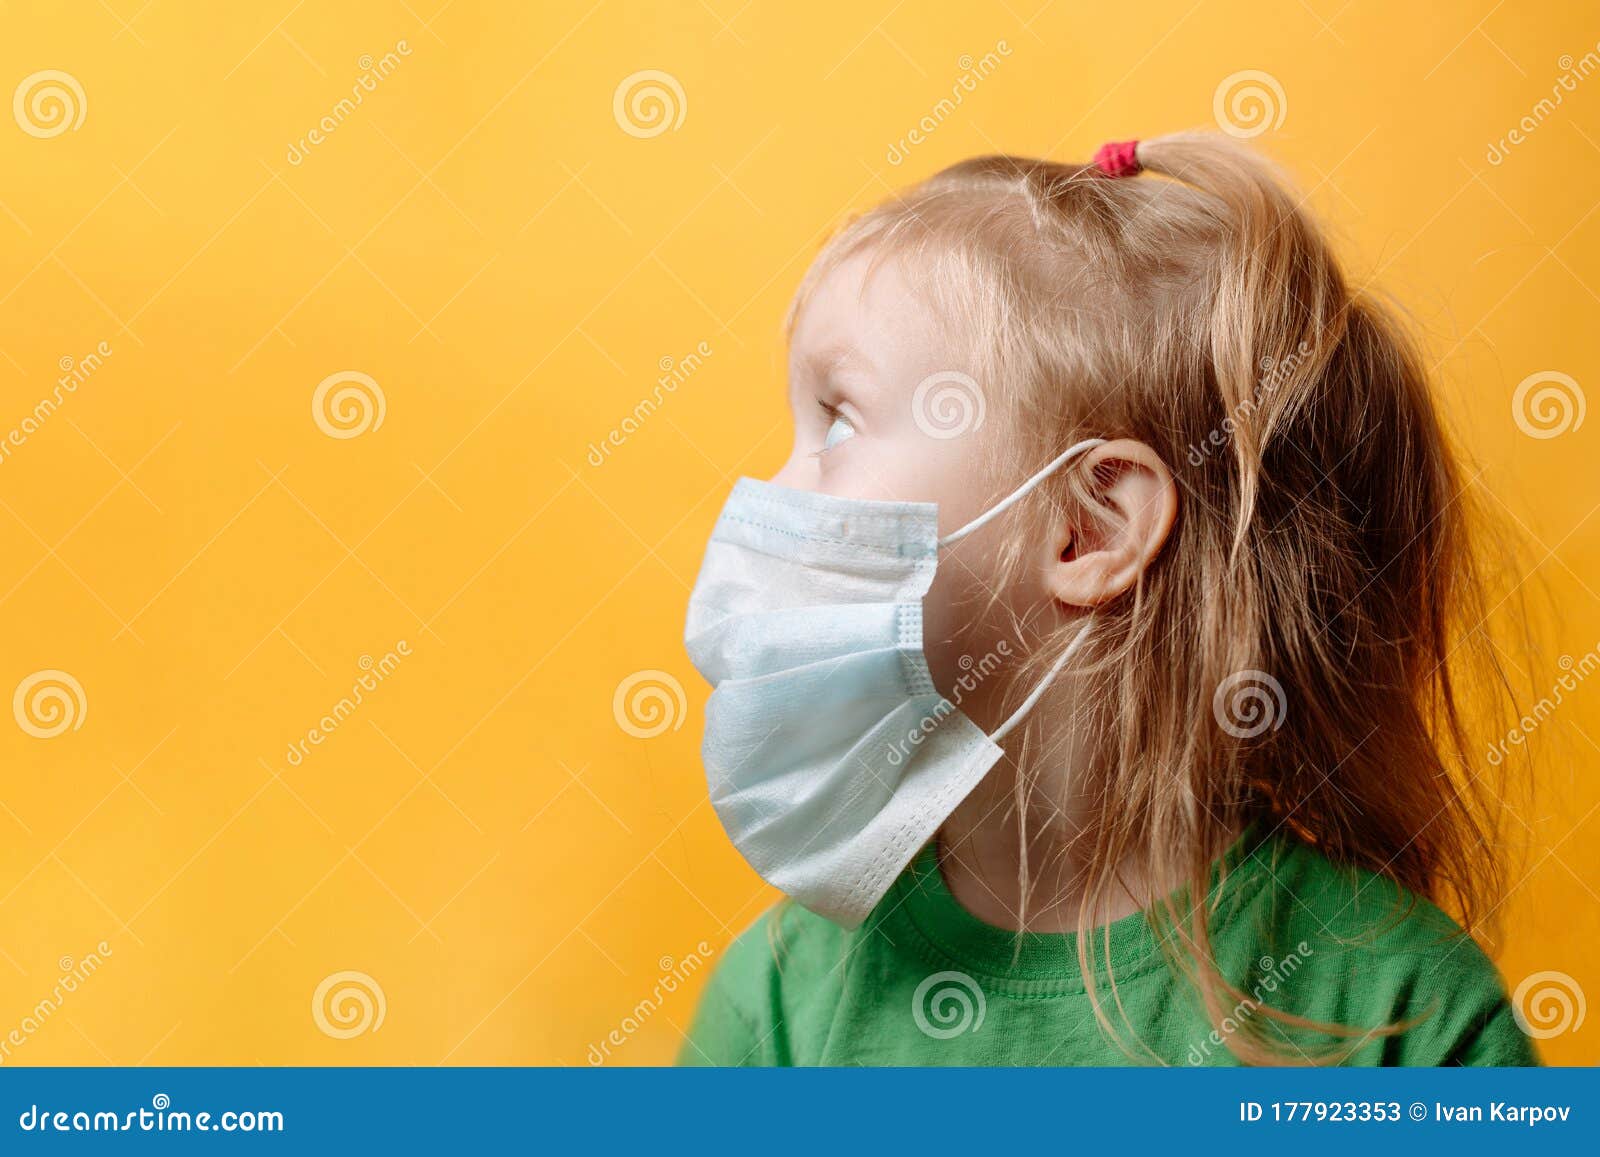 Download A Small Child In A White Medical Mask On A Yellow Background Coronavirus Protecting Children From The Epidemic Space Stock Image Image Of Male Medical 177923353 PSD Mockup Templates